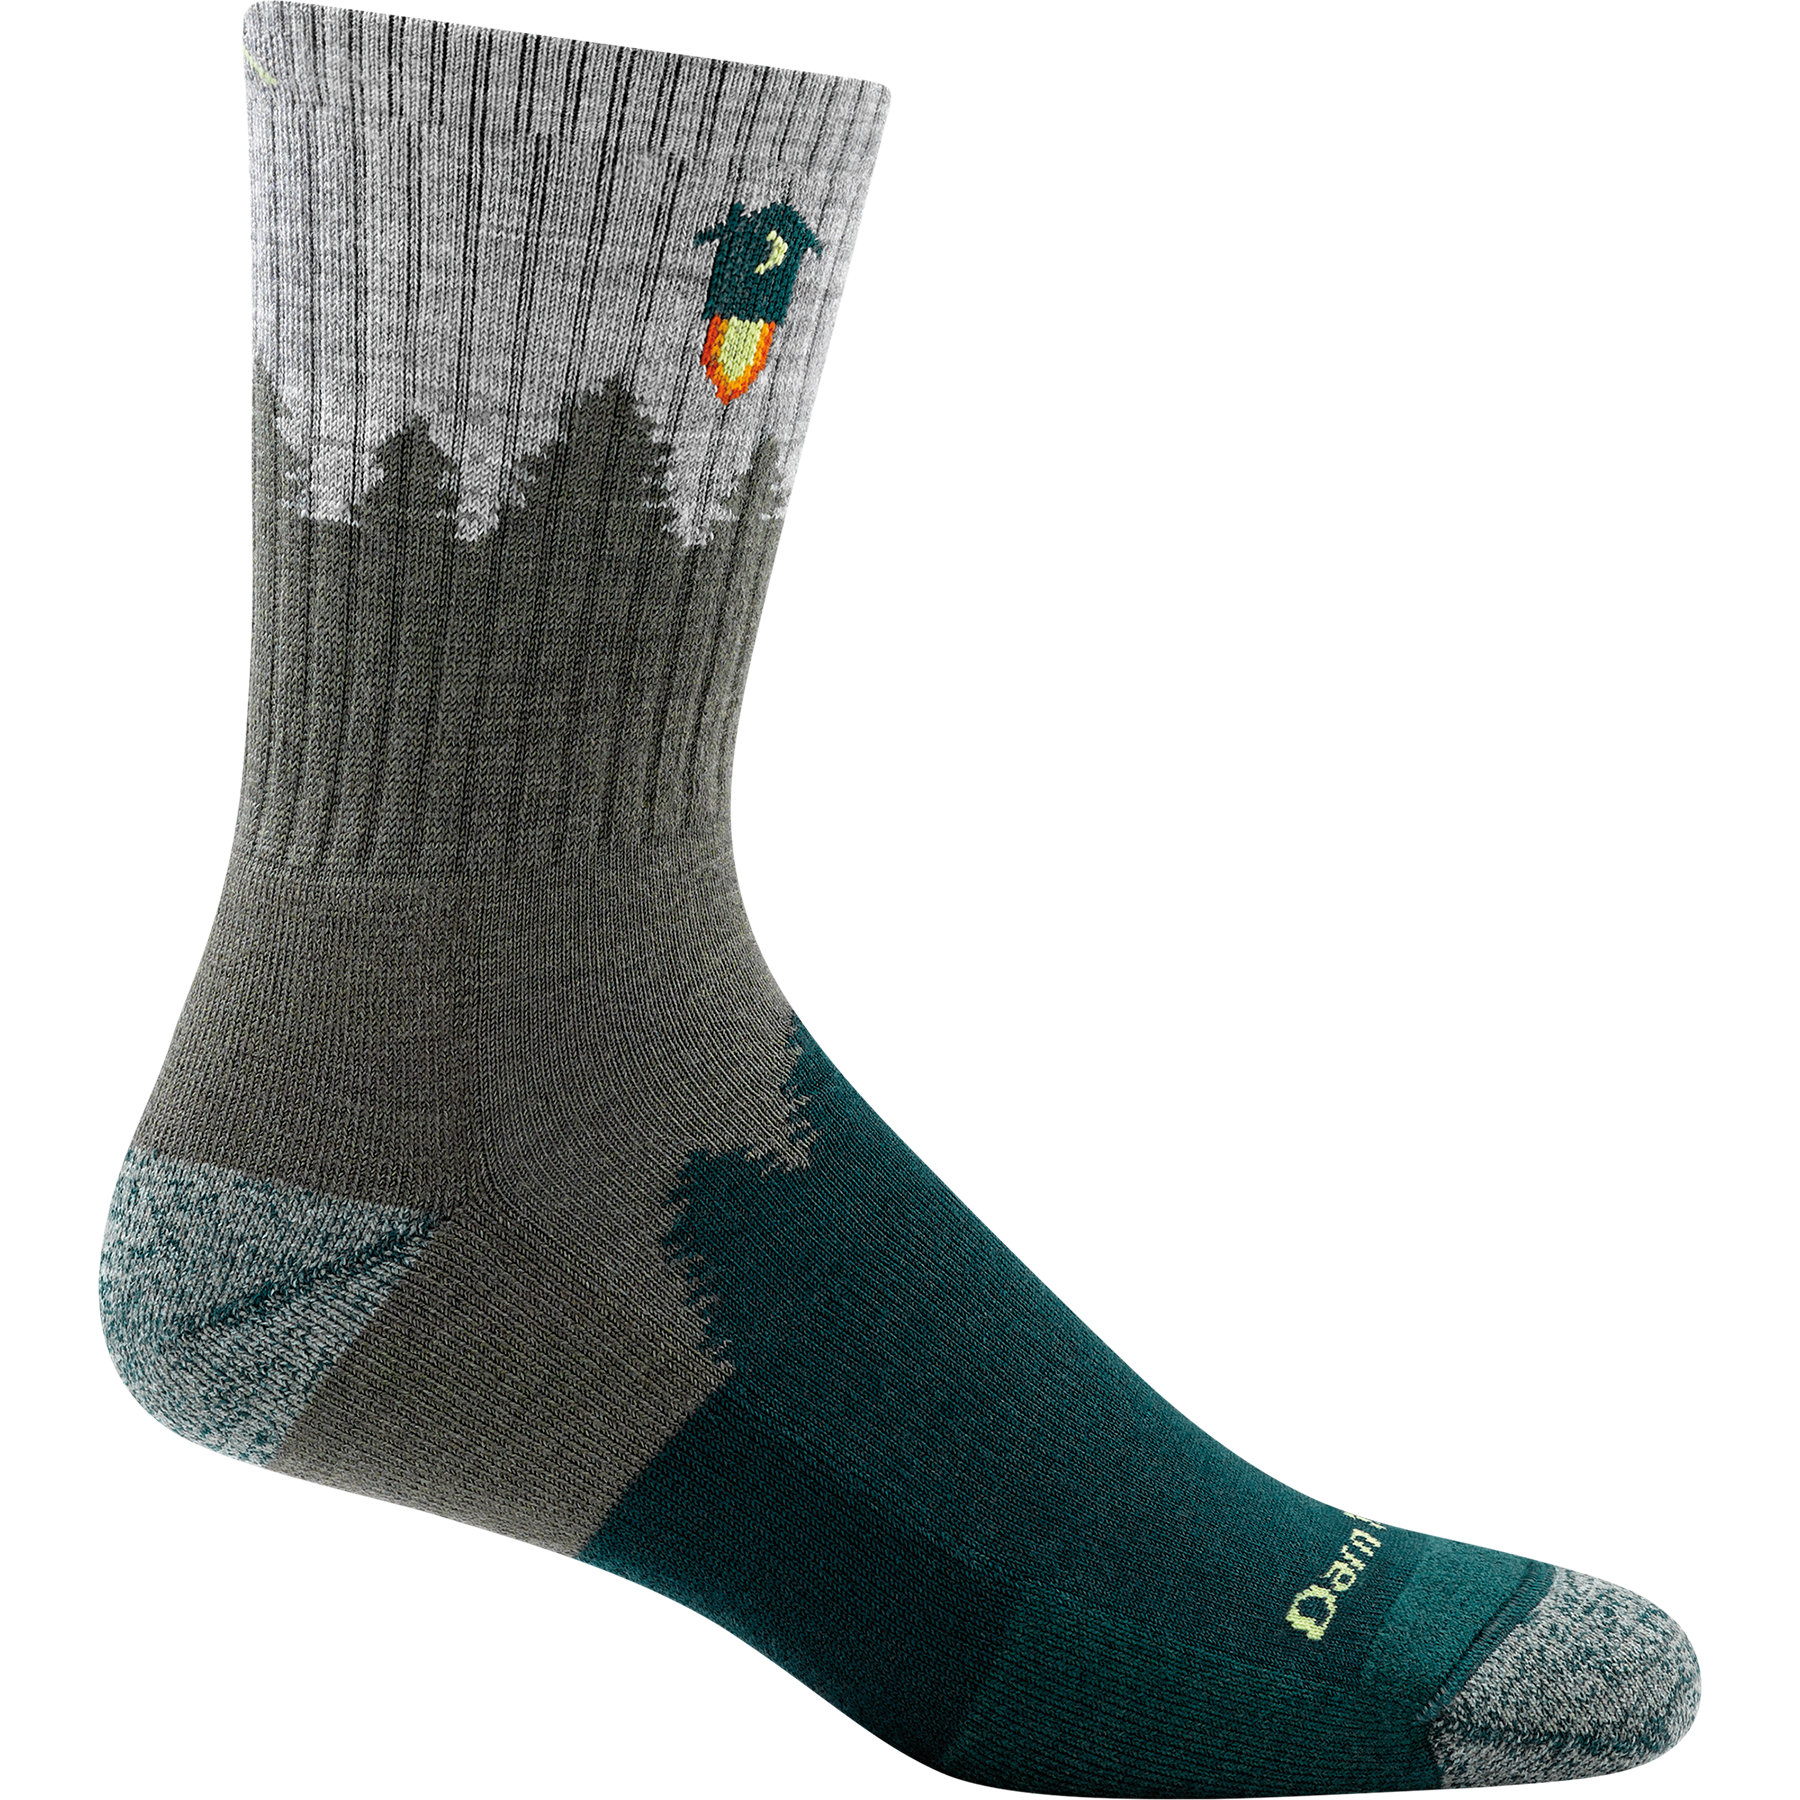 Darn tough green, olive and gray sock with fir tree outline